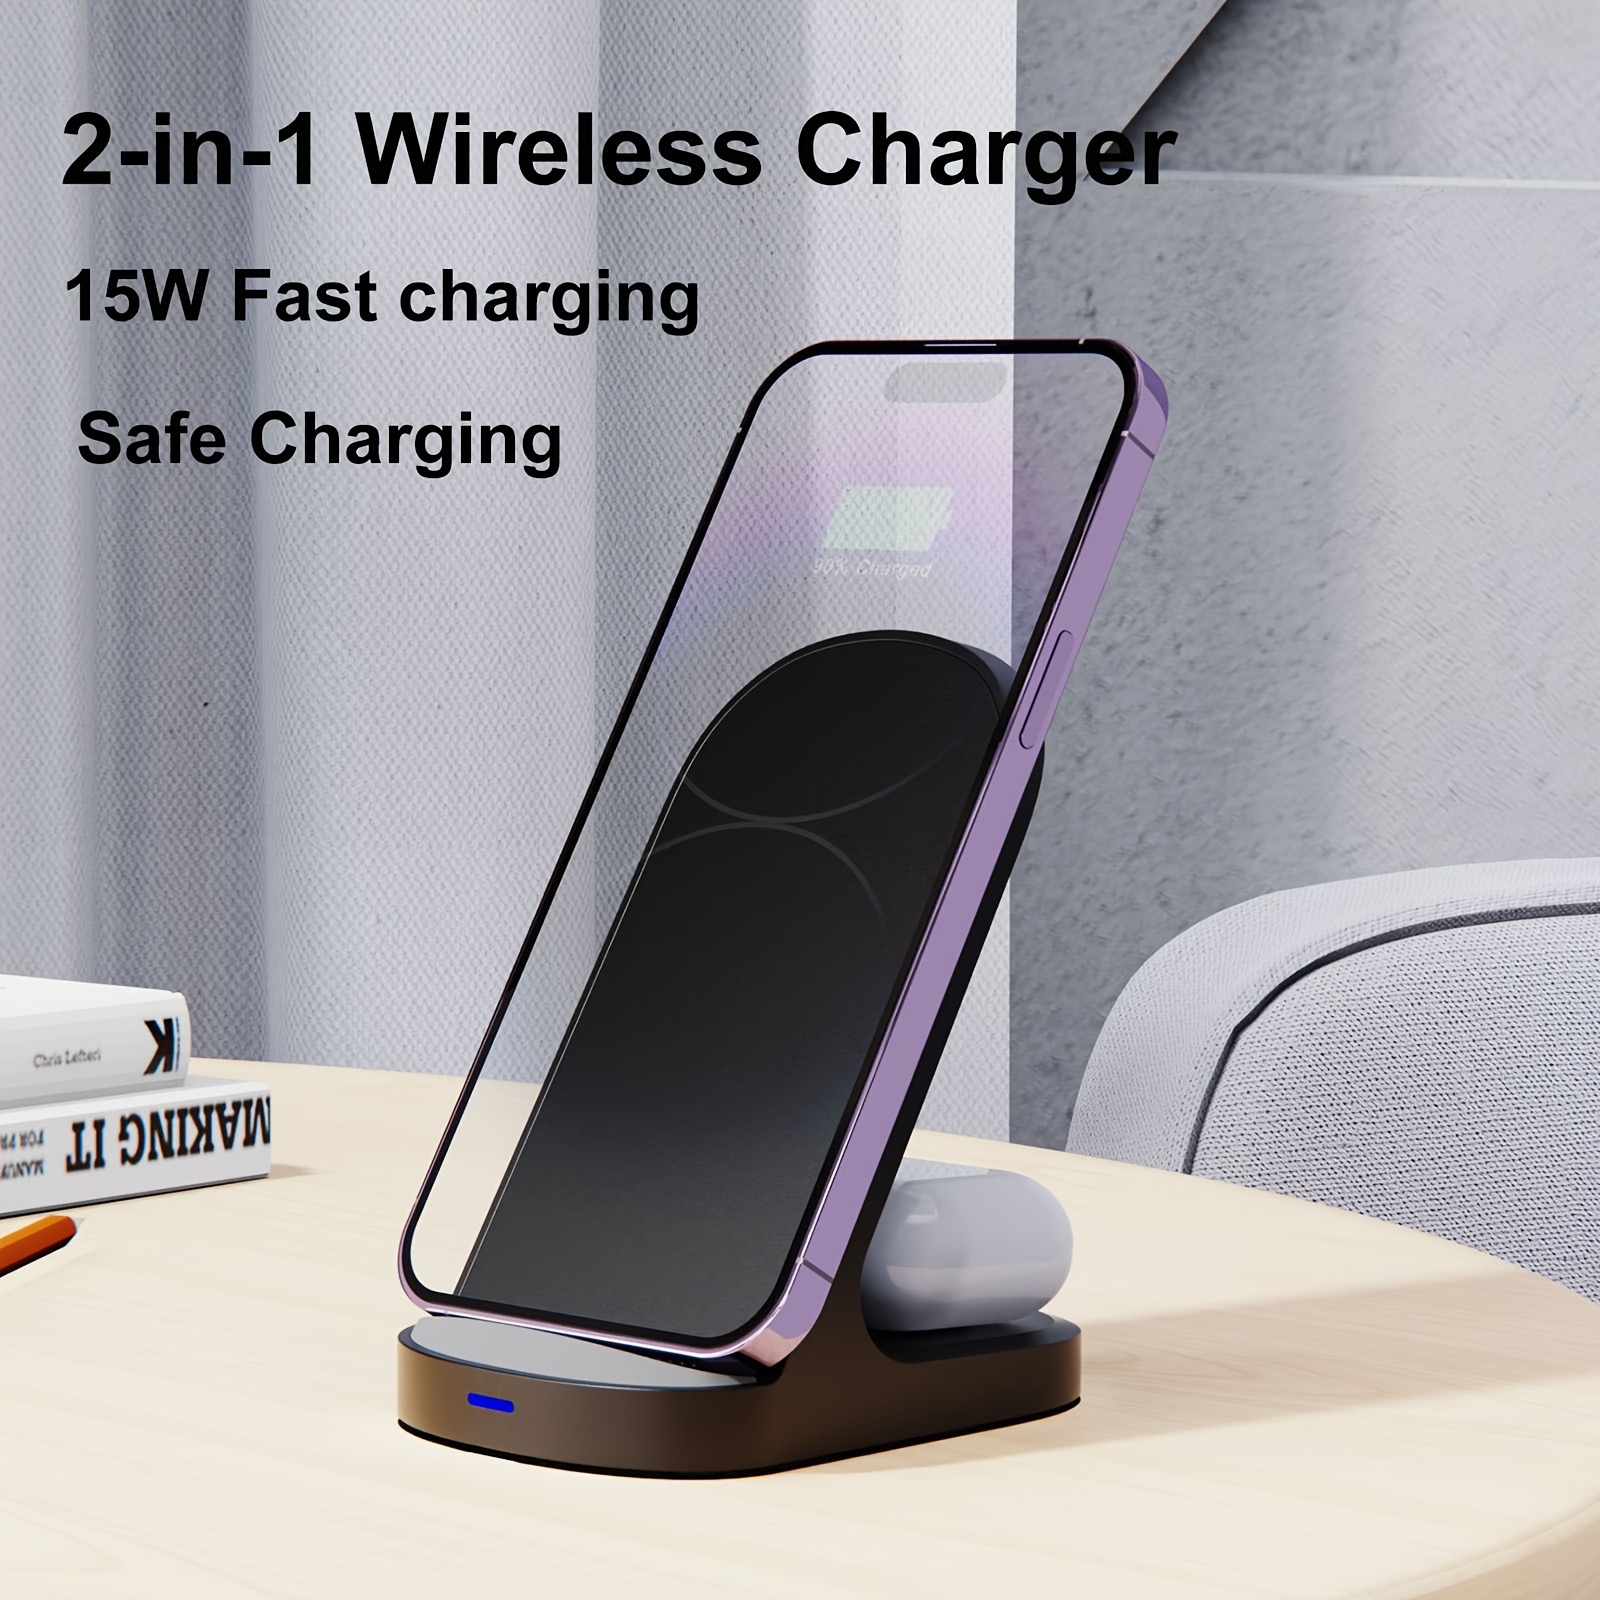 

2 In 1 Wireless Charger, Desktop Cell Phone Holder, Vertical Wireless Charger, Up To 15w Fast Charging (subject To Actual Cell Phone)